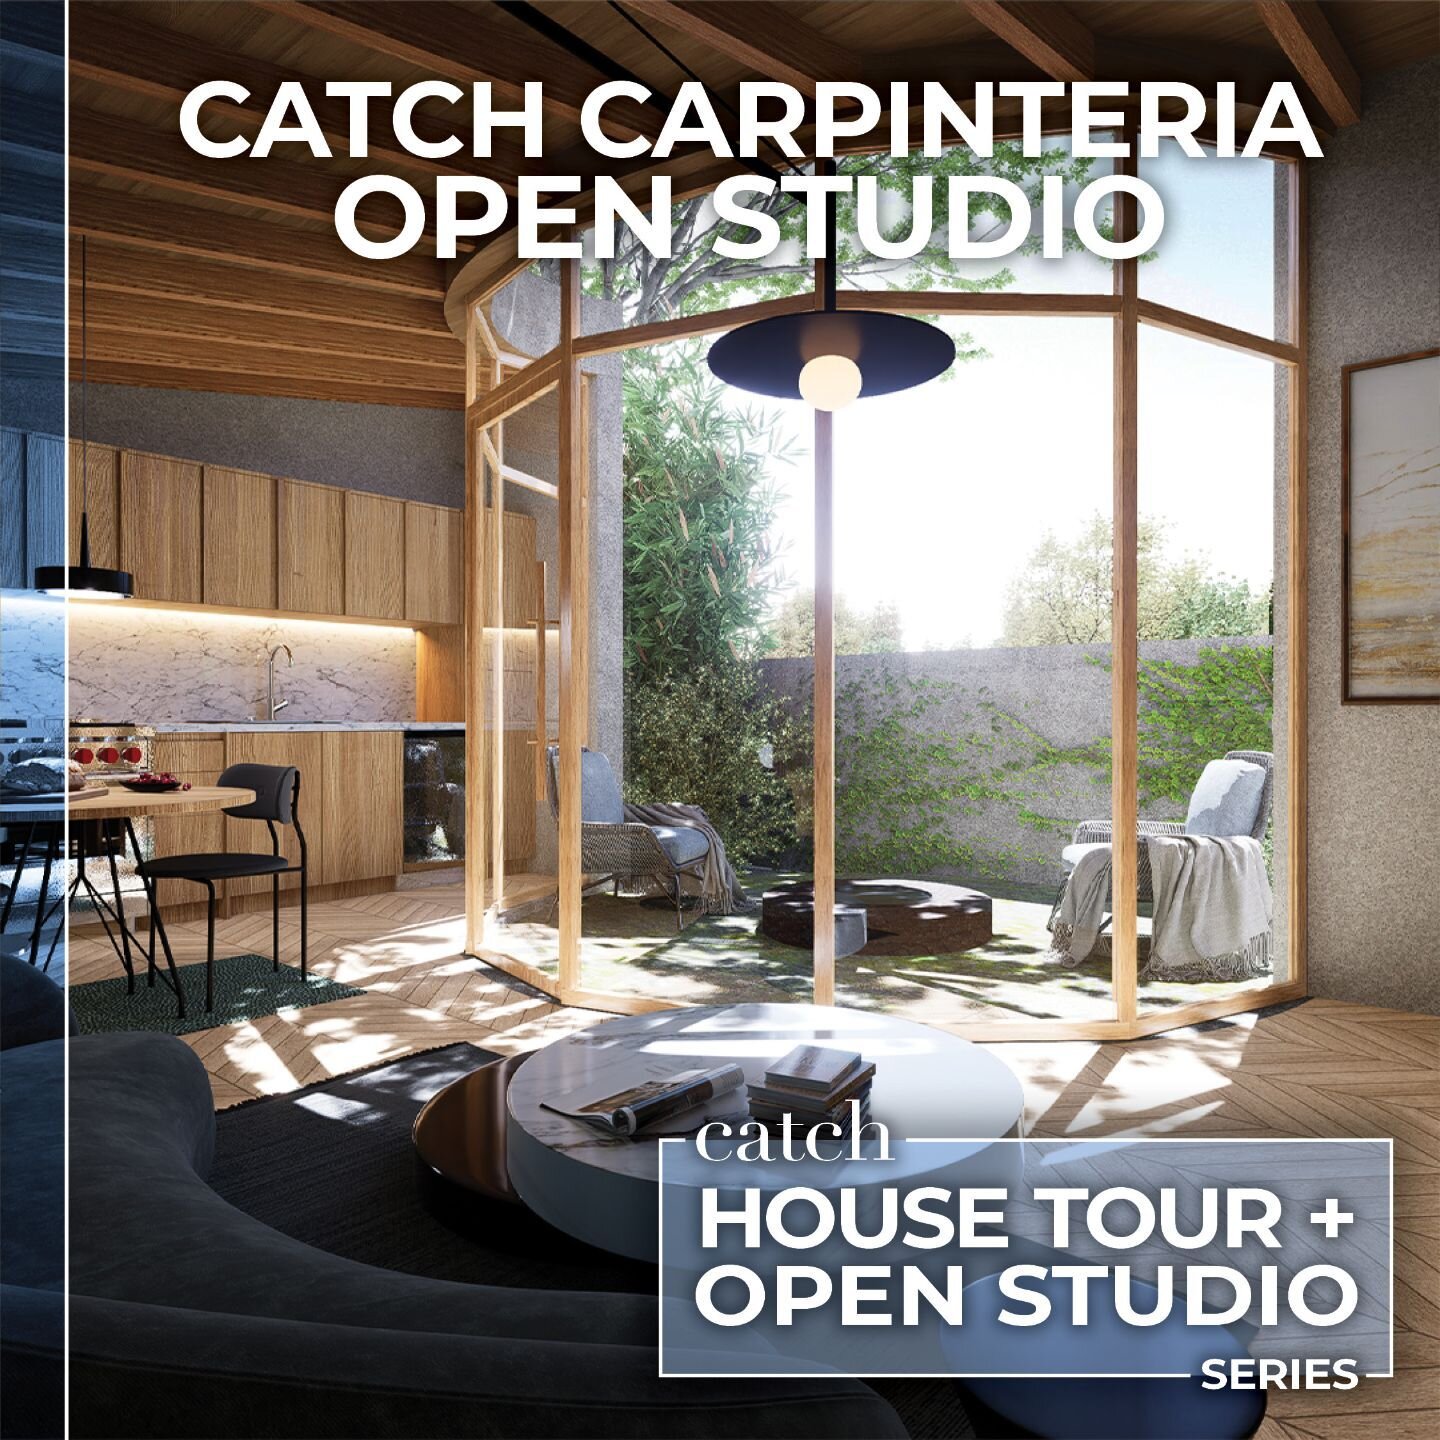 We are excited to announce our upcoming Spring Event Series, and cordially invite you to attend our inaugural home tours and open studios.

On May 29th, we invite you to visit our new Carpinteria Studio. Join us as we plant new seeds and extend our r